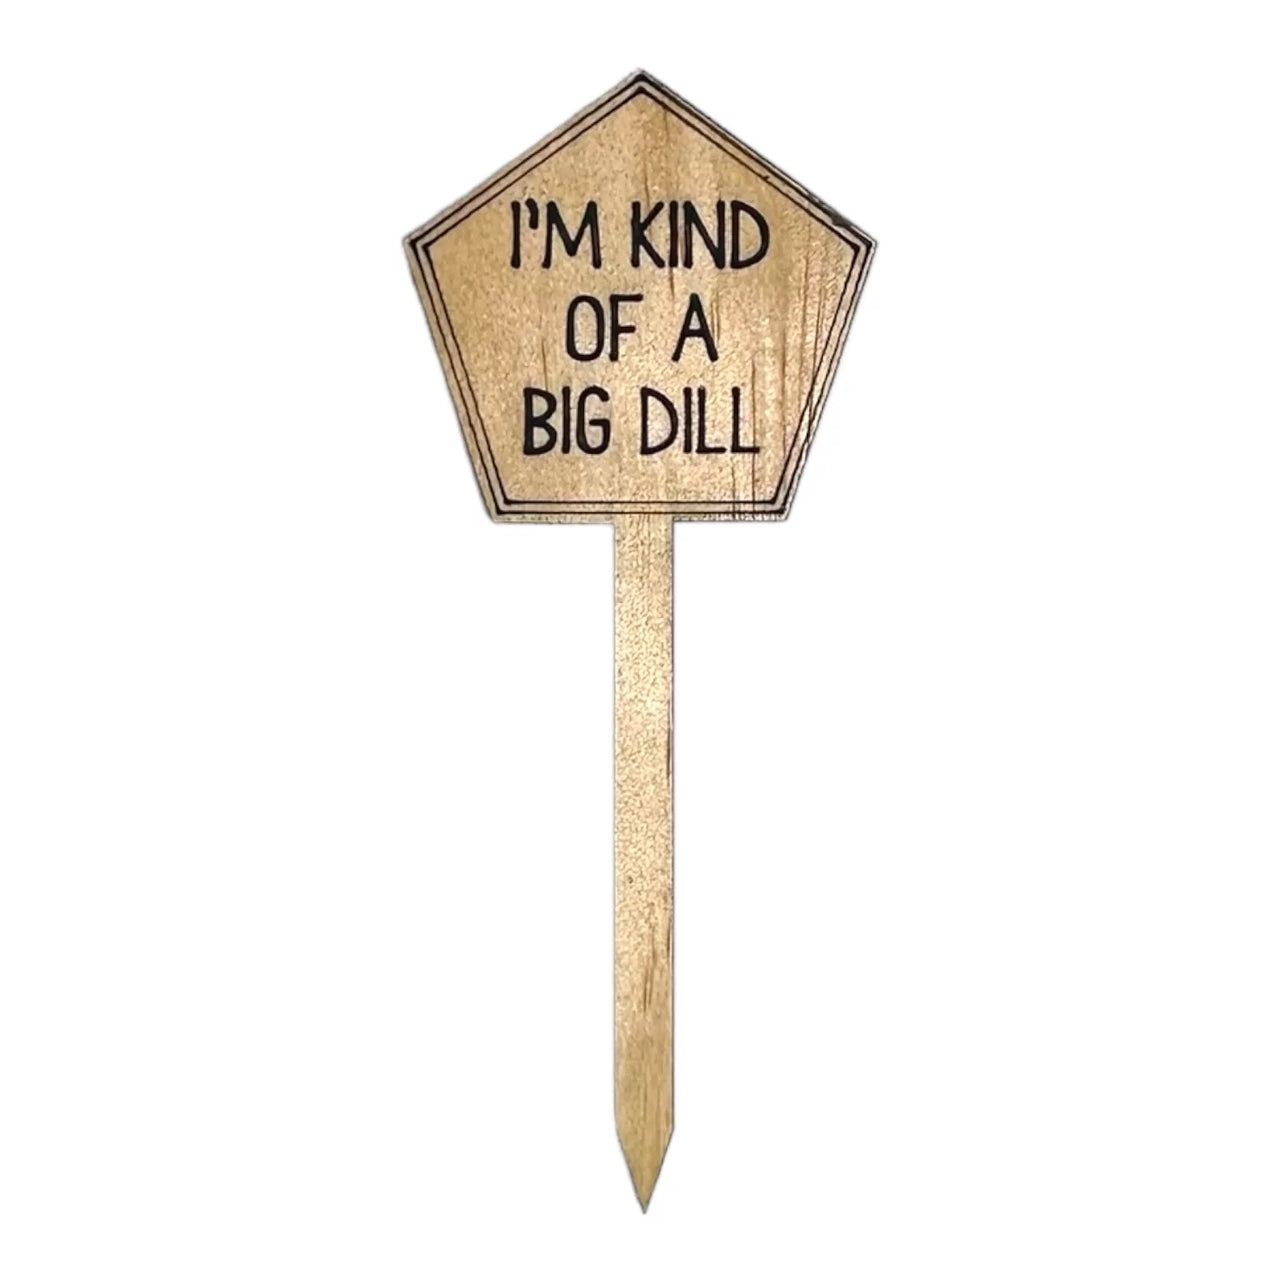 Funny Plant Stakes - Made from Sustainable Timber - IM KIND OF A BIG DILL